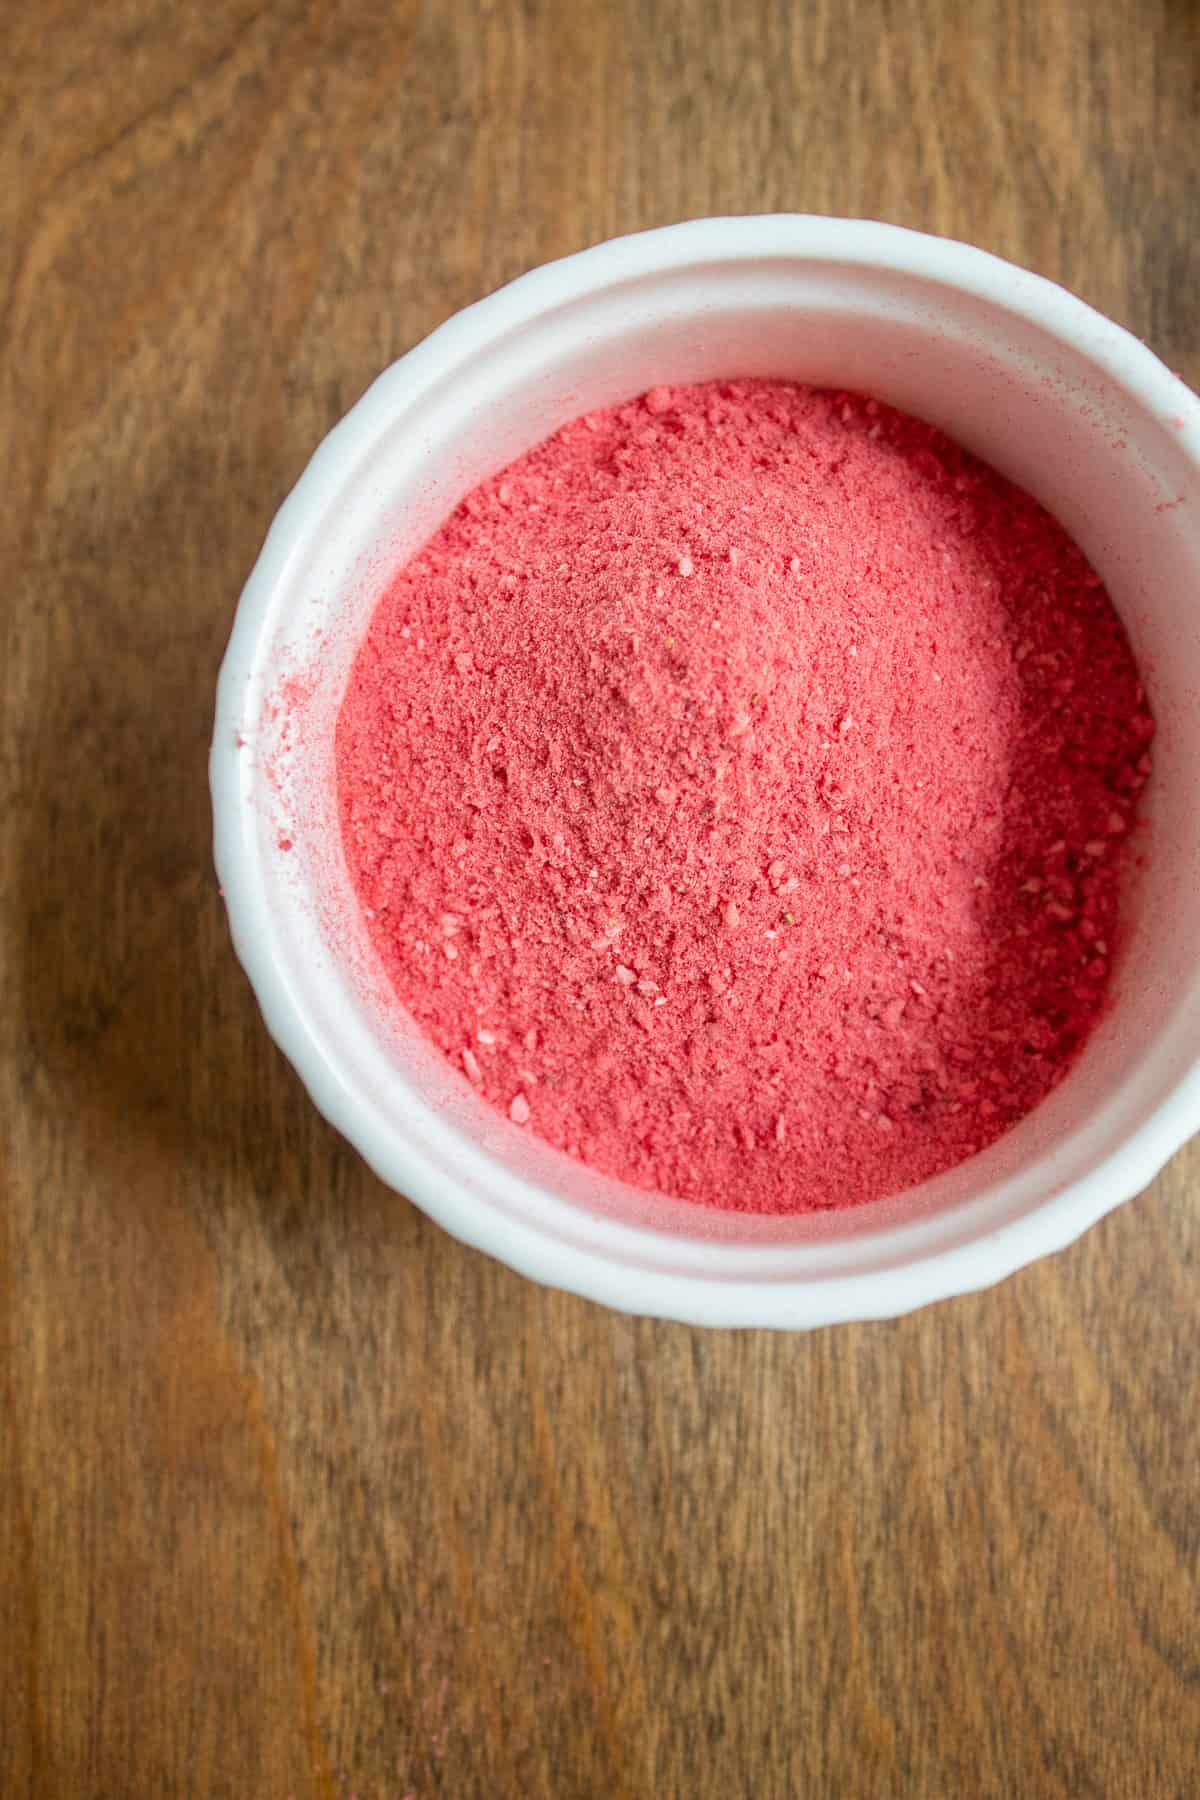 Crushed freeze-dried strawberry powder in a small white bowl.